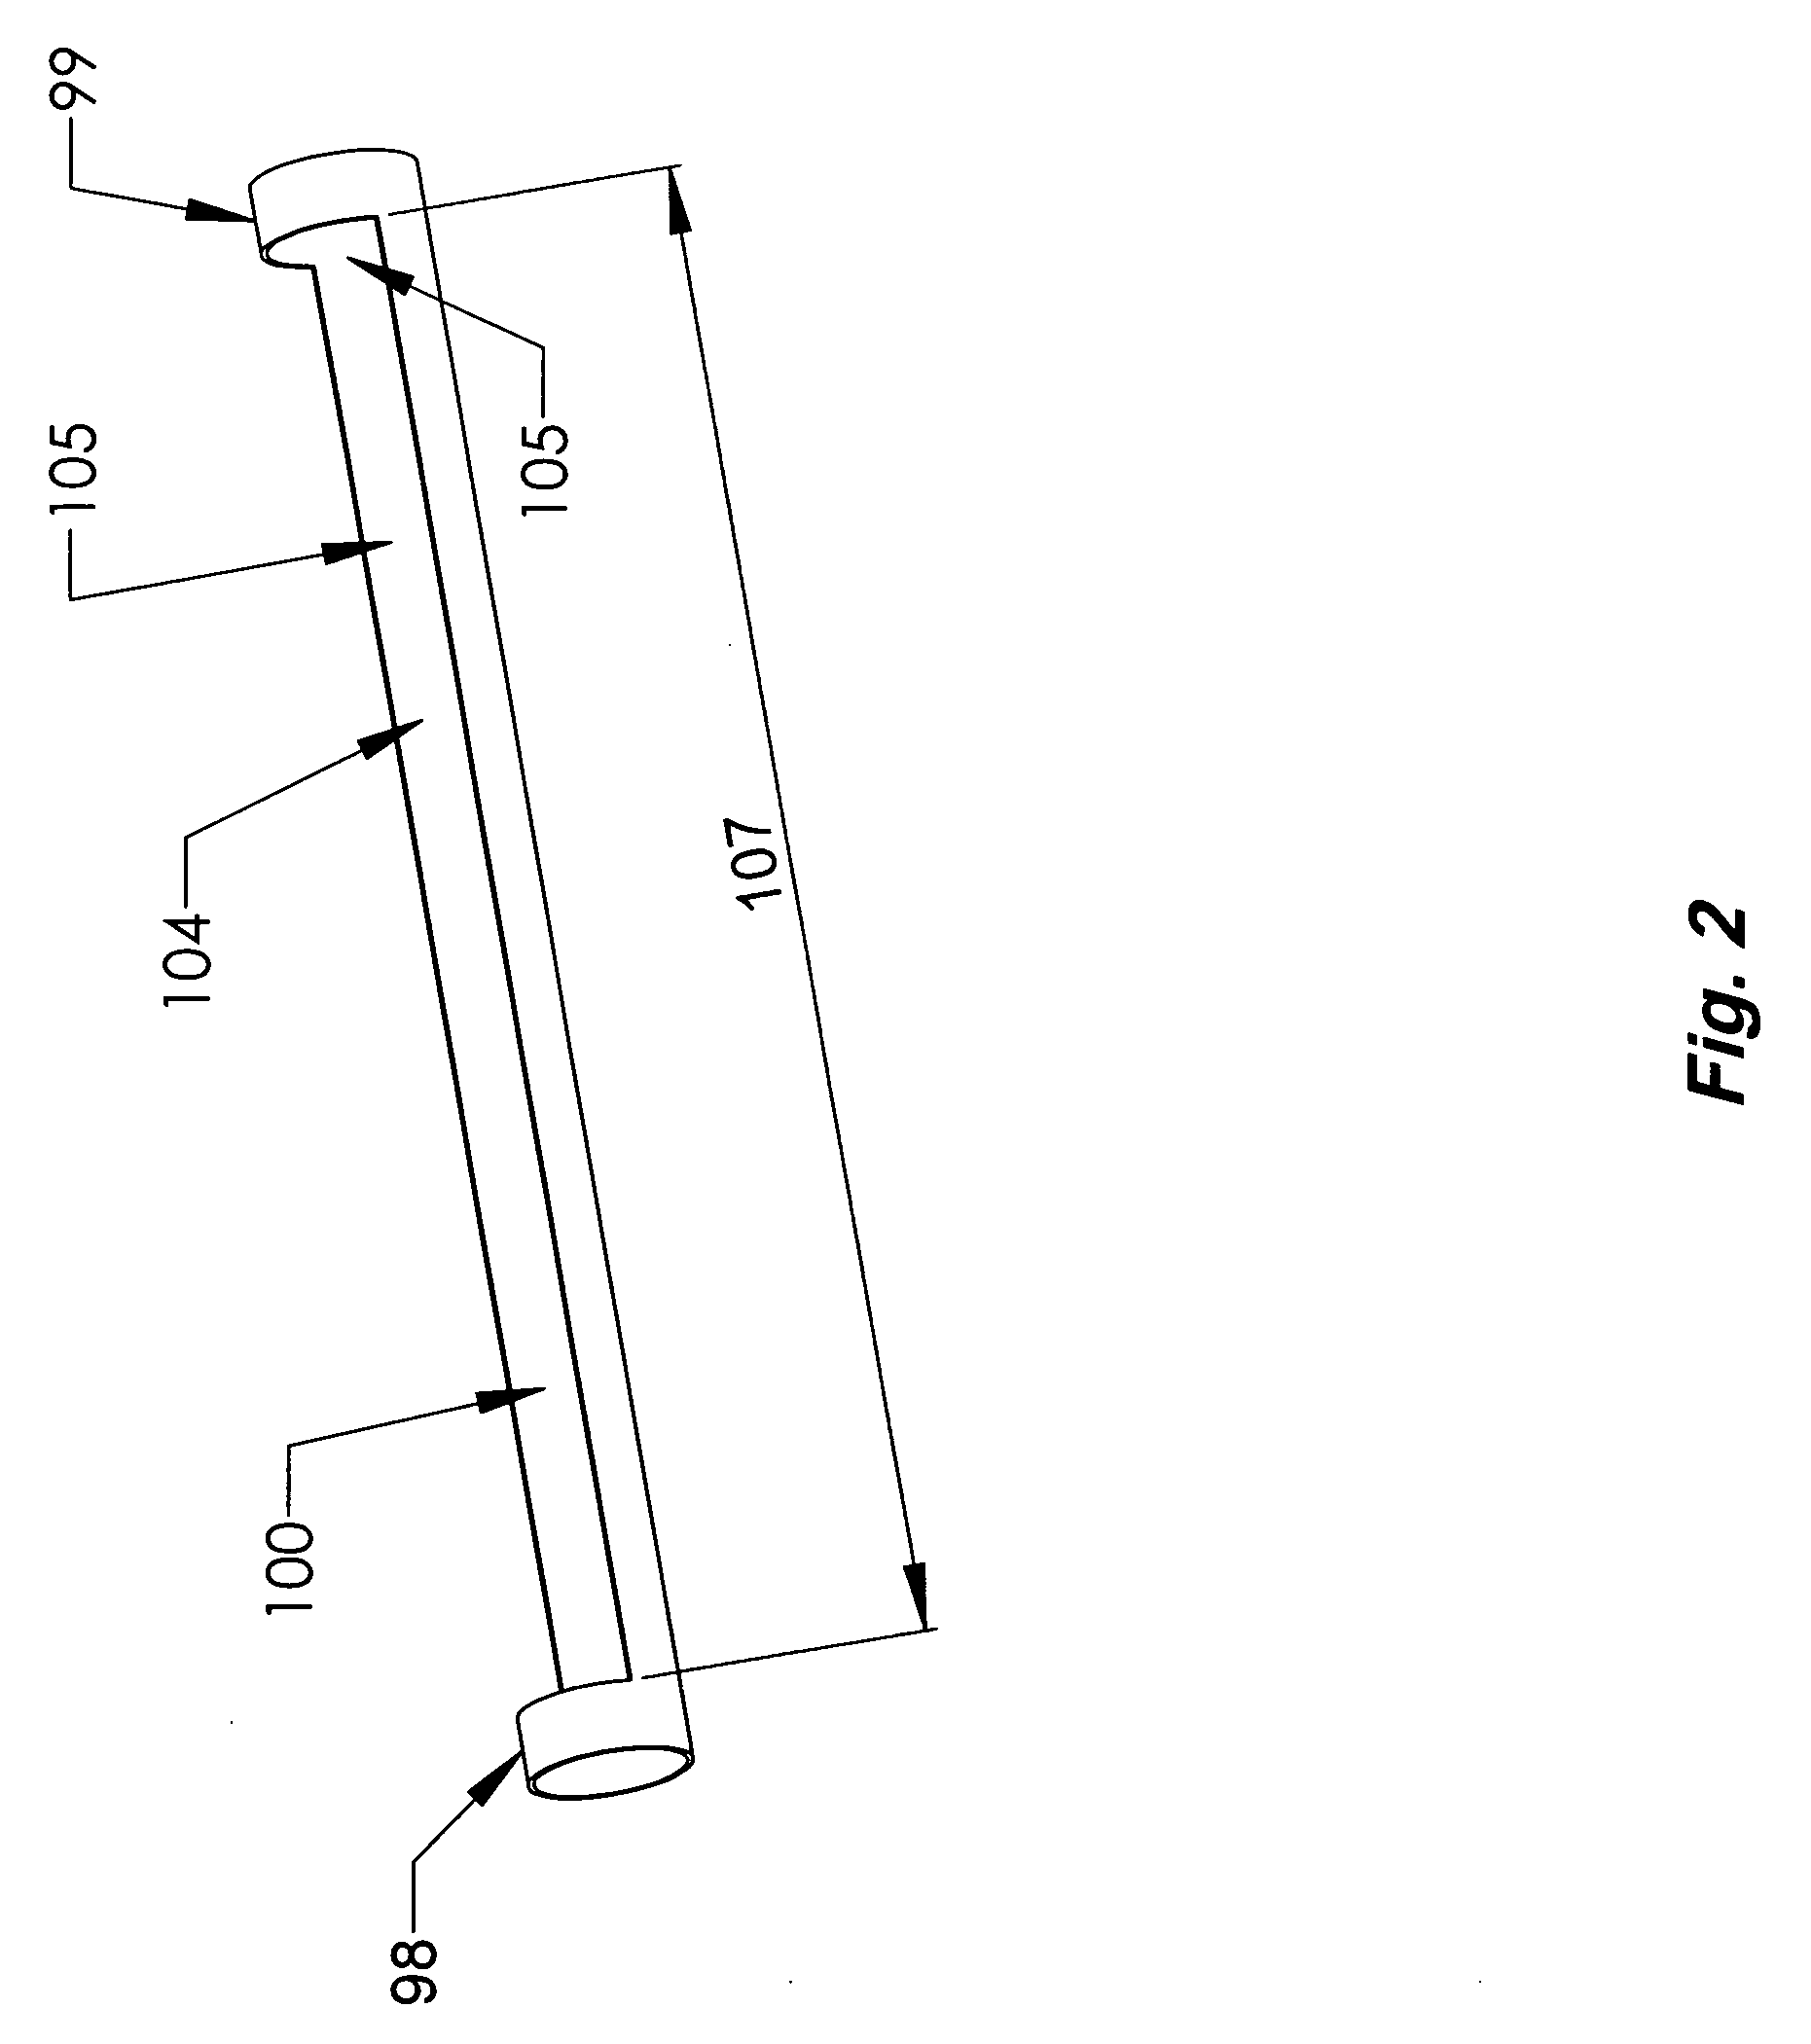 Surgical material applicator